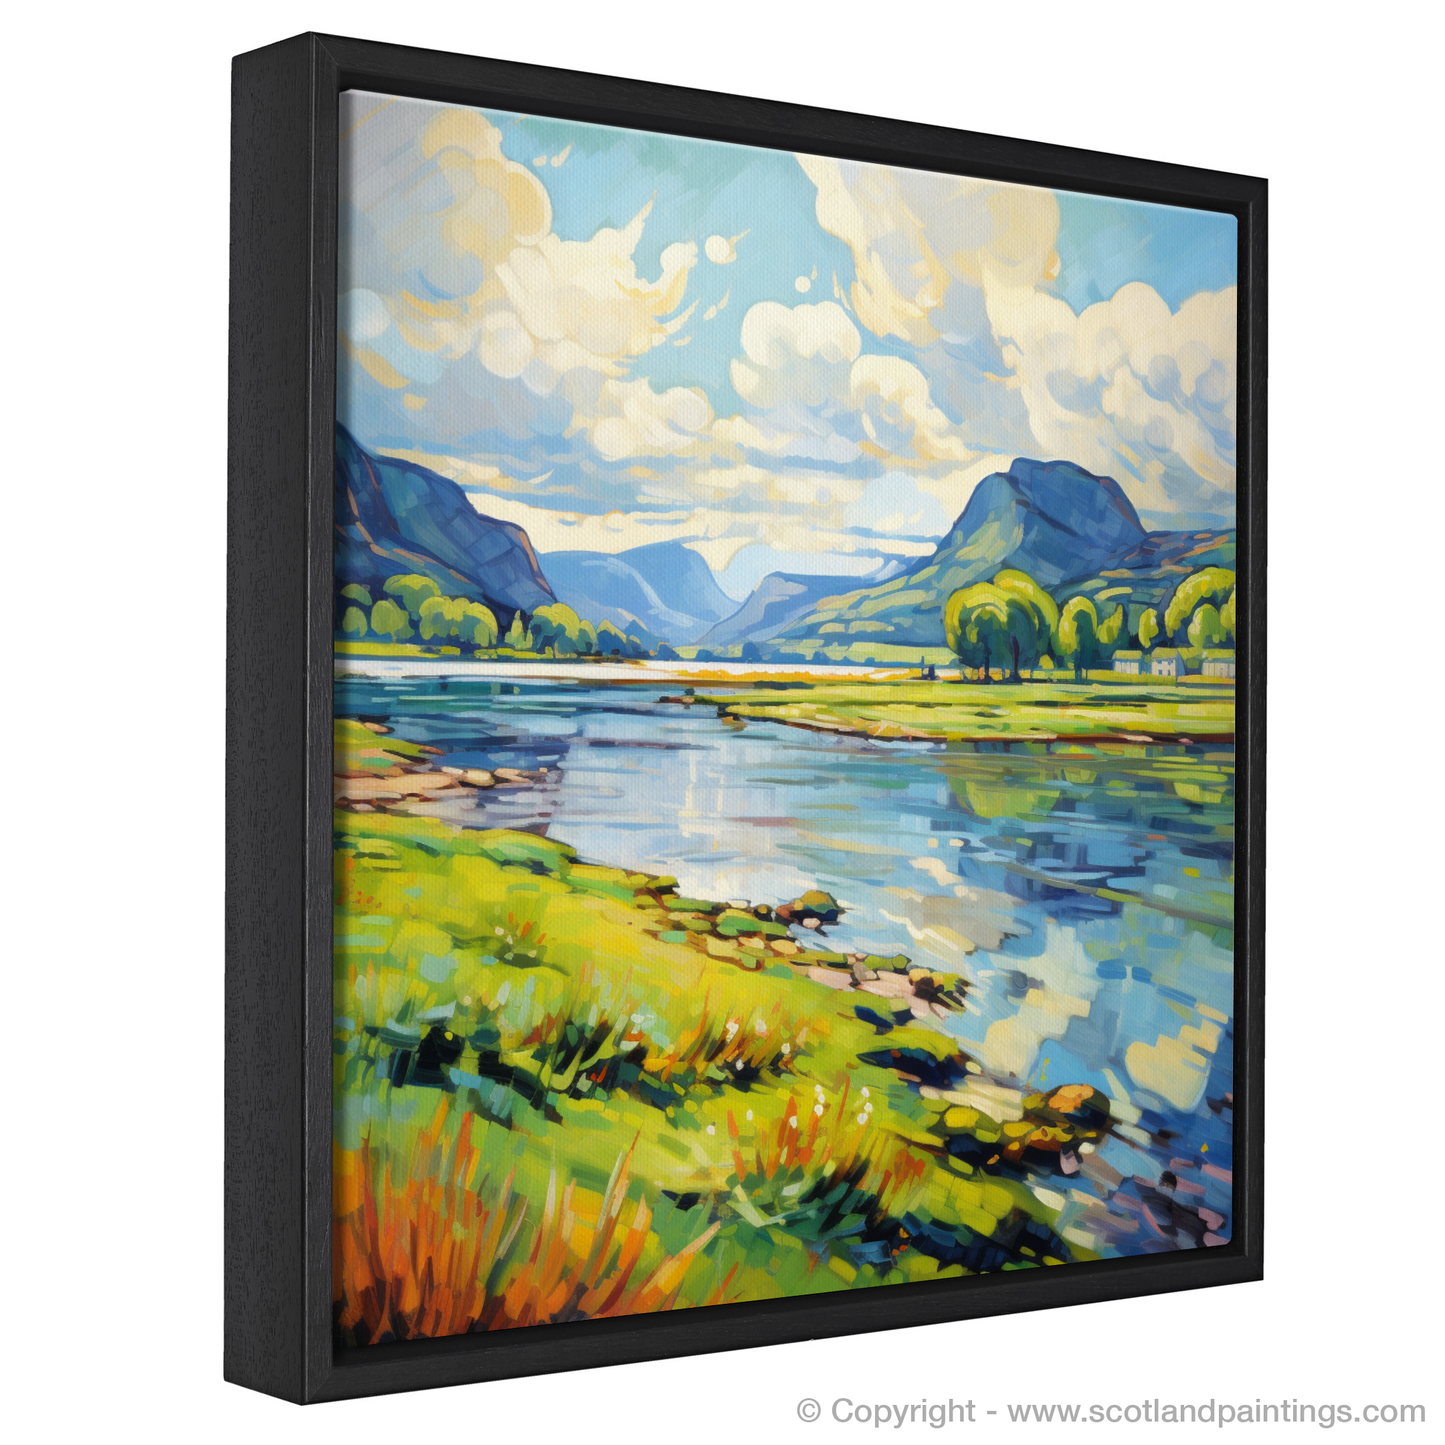 Painting and Art Print of Loch Leven, Perth and Kinross in summer entitled "Summer Serenade at Loch Leven".